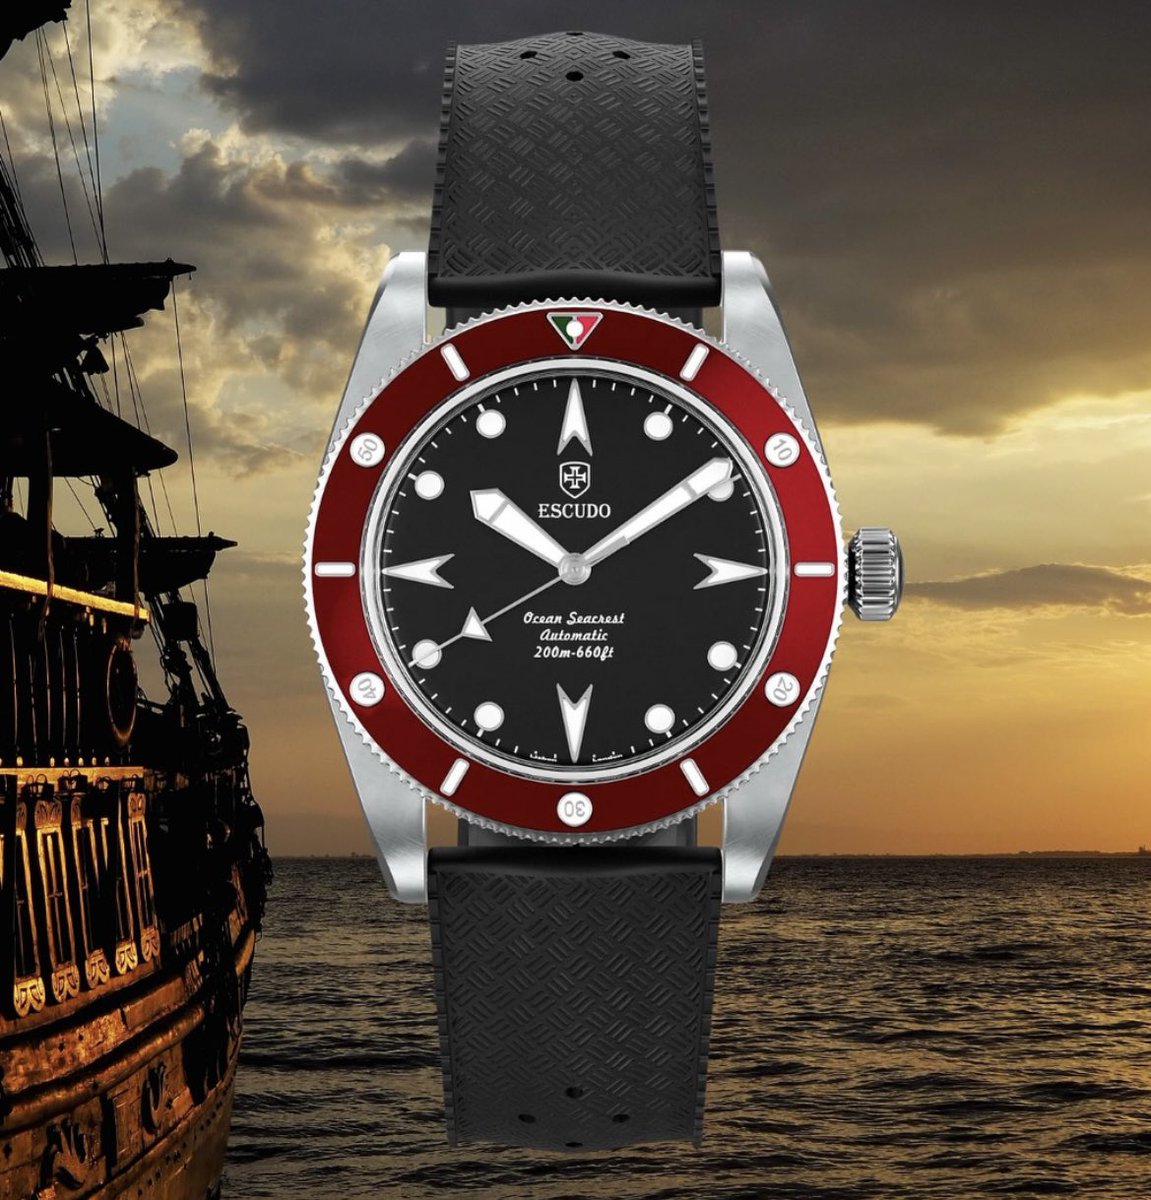 Dive into the elegance of exploration with our Limited Edition Ocean Seacrest watches. The red 'Casco Burst' captures the spirit of adventure on your wrist. Don't miss out there's only 1 left in stock!

#OceanSeacrest #BuiltToPerform #luxurywatch #watchaddict #divewatch